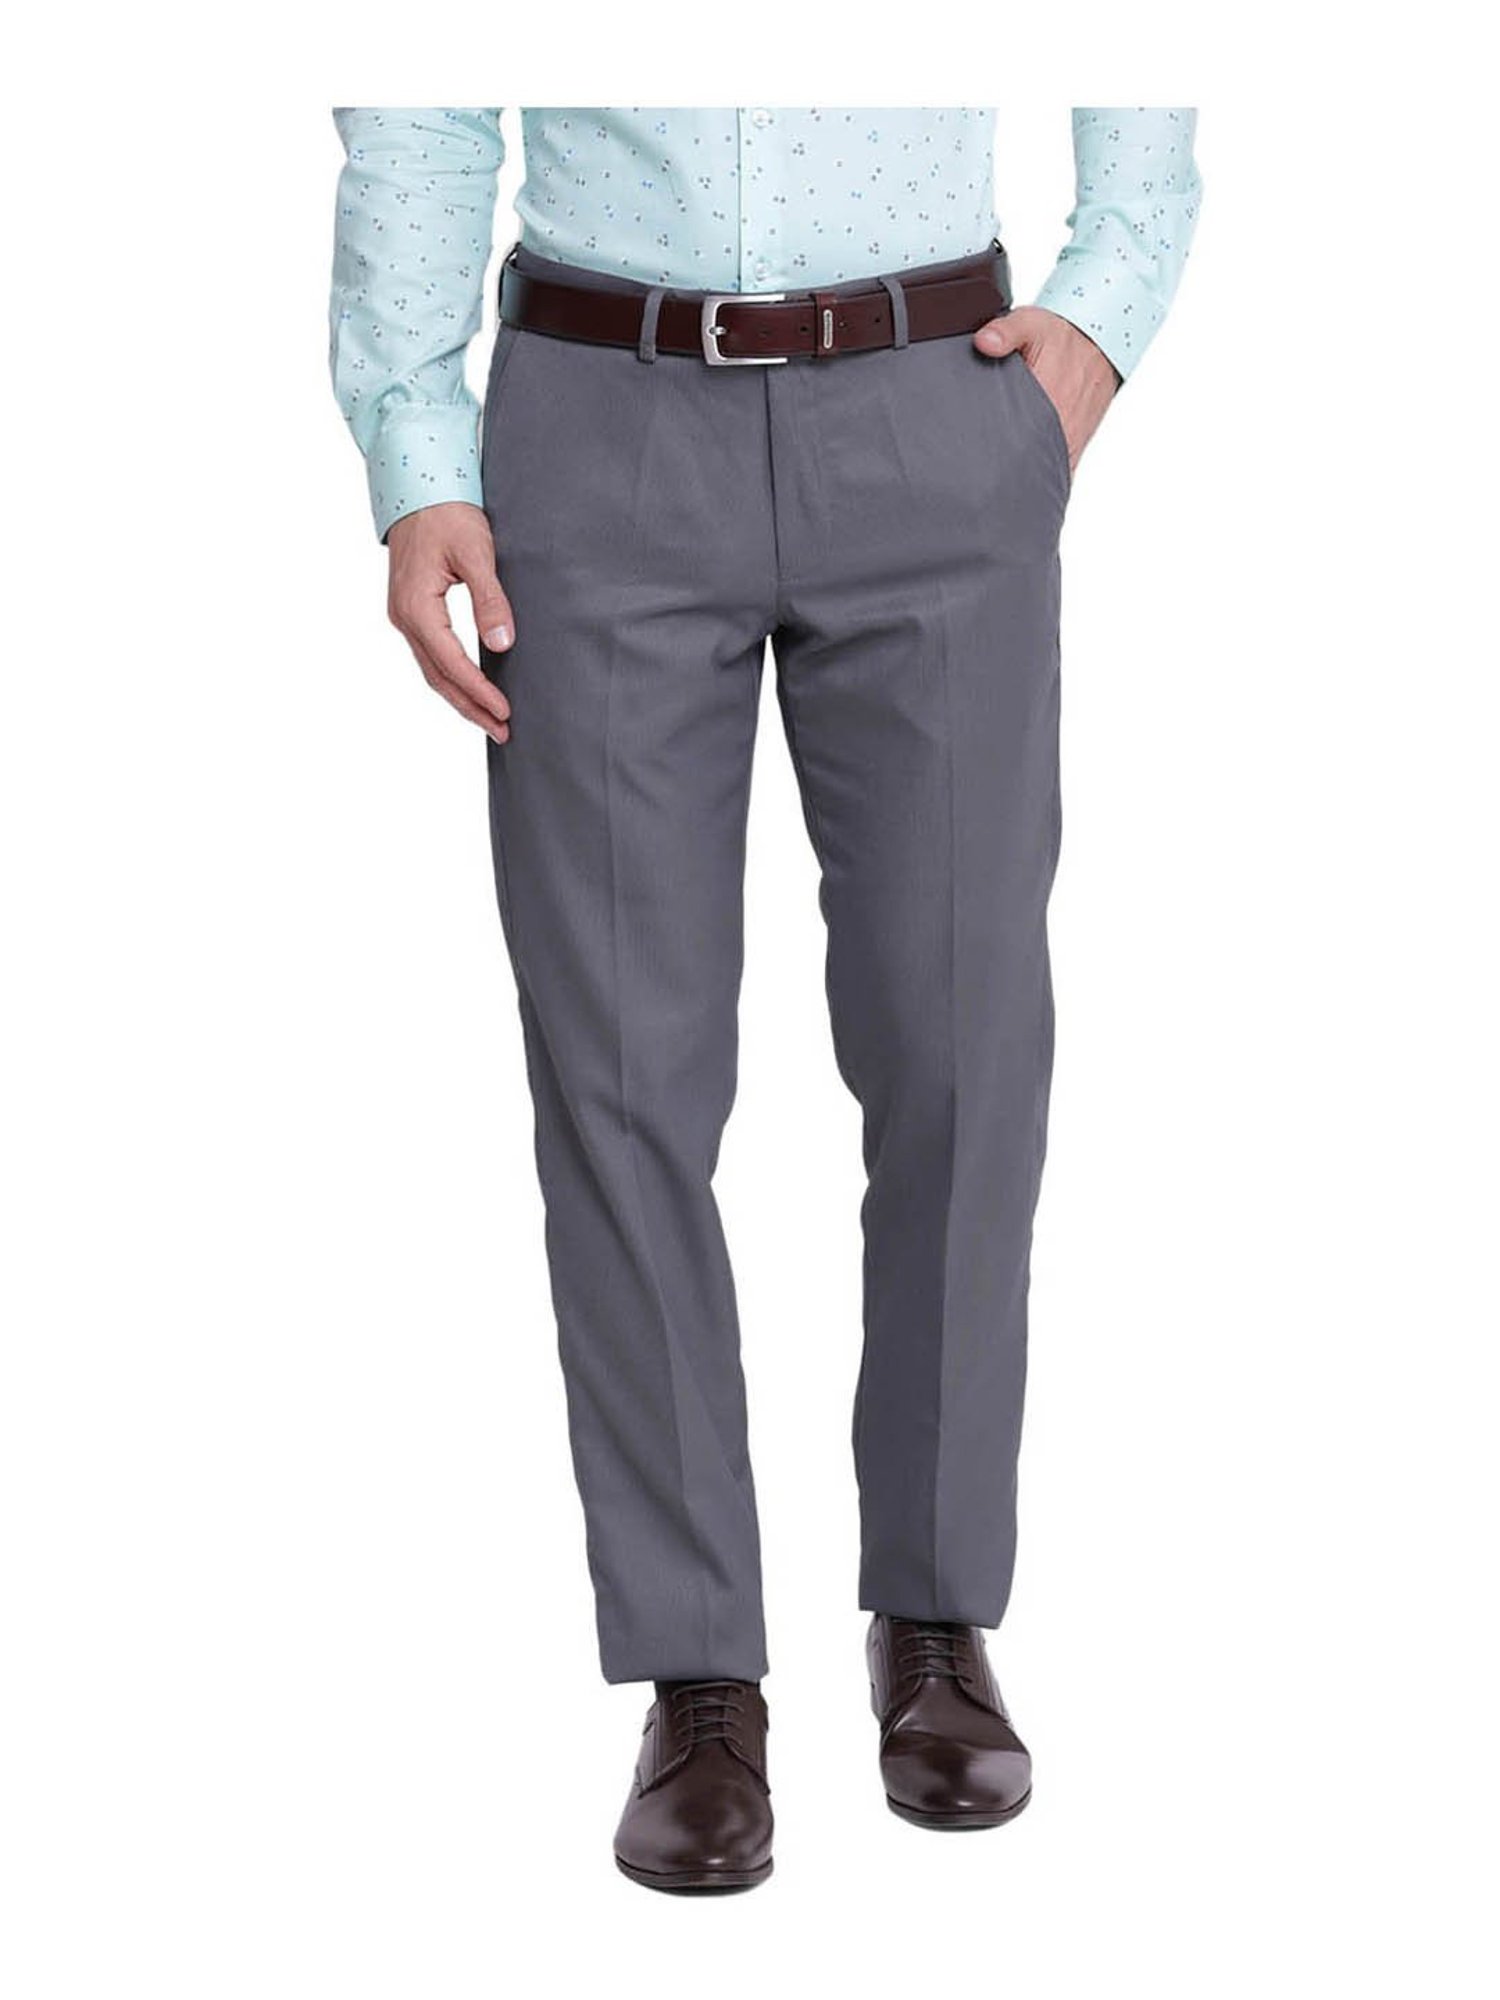 New Formal Trousers Chinos  Jeans  Turtle Creek Clothing  Corporate  Clothing Manufacturer  Johannesburg South Africa